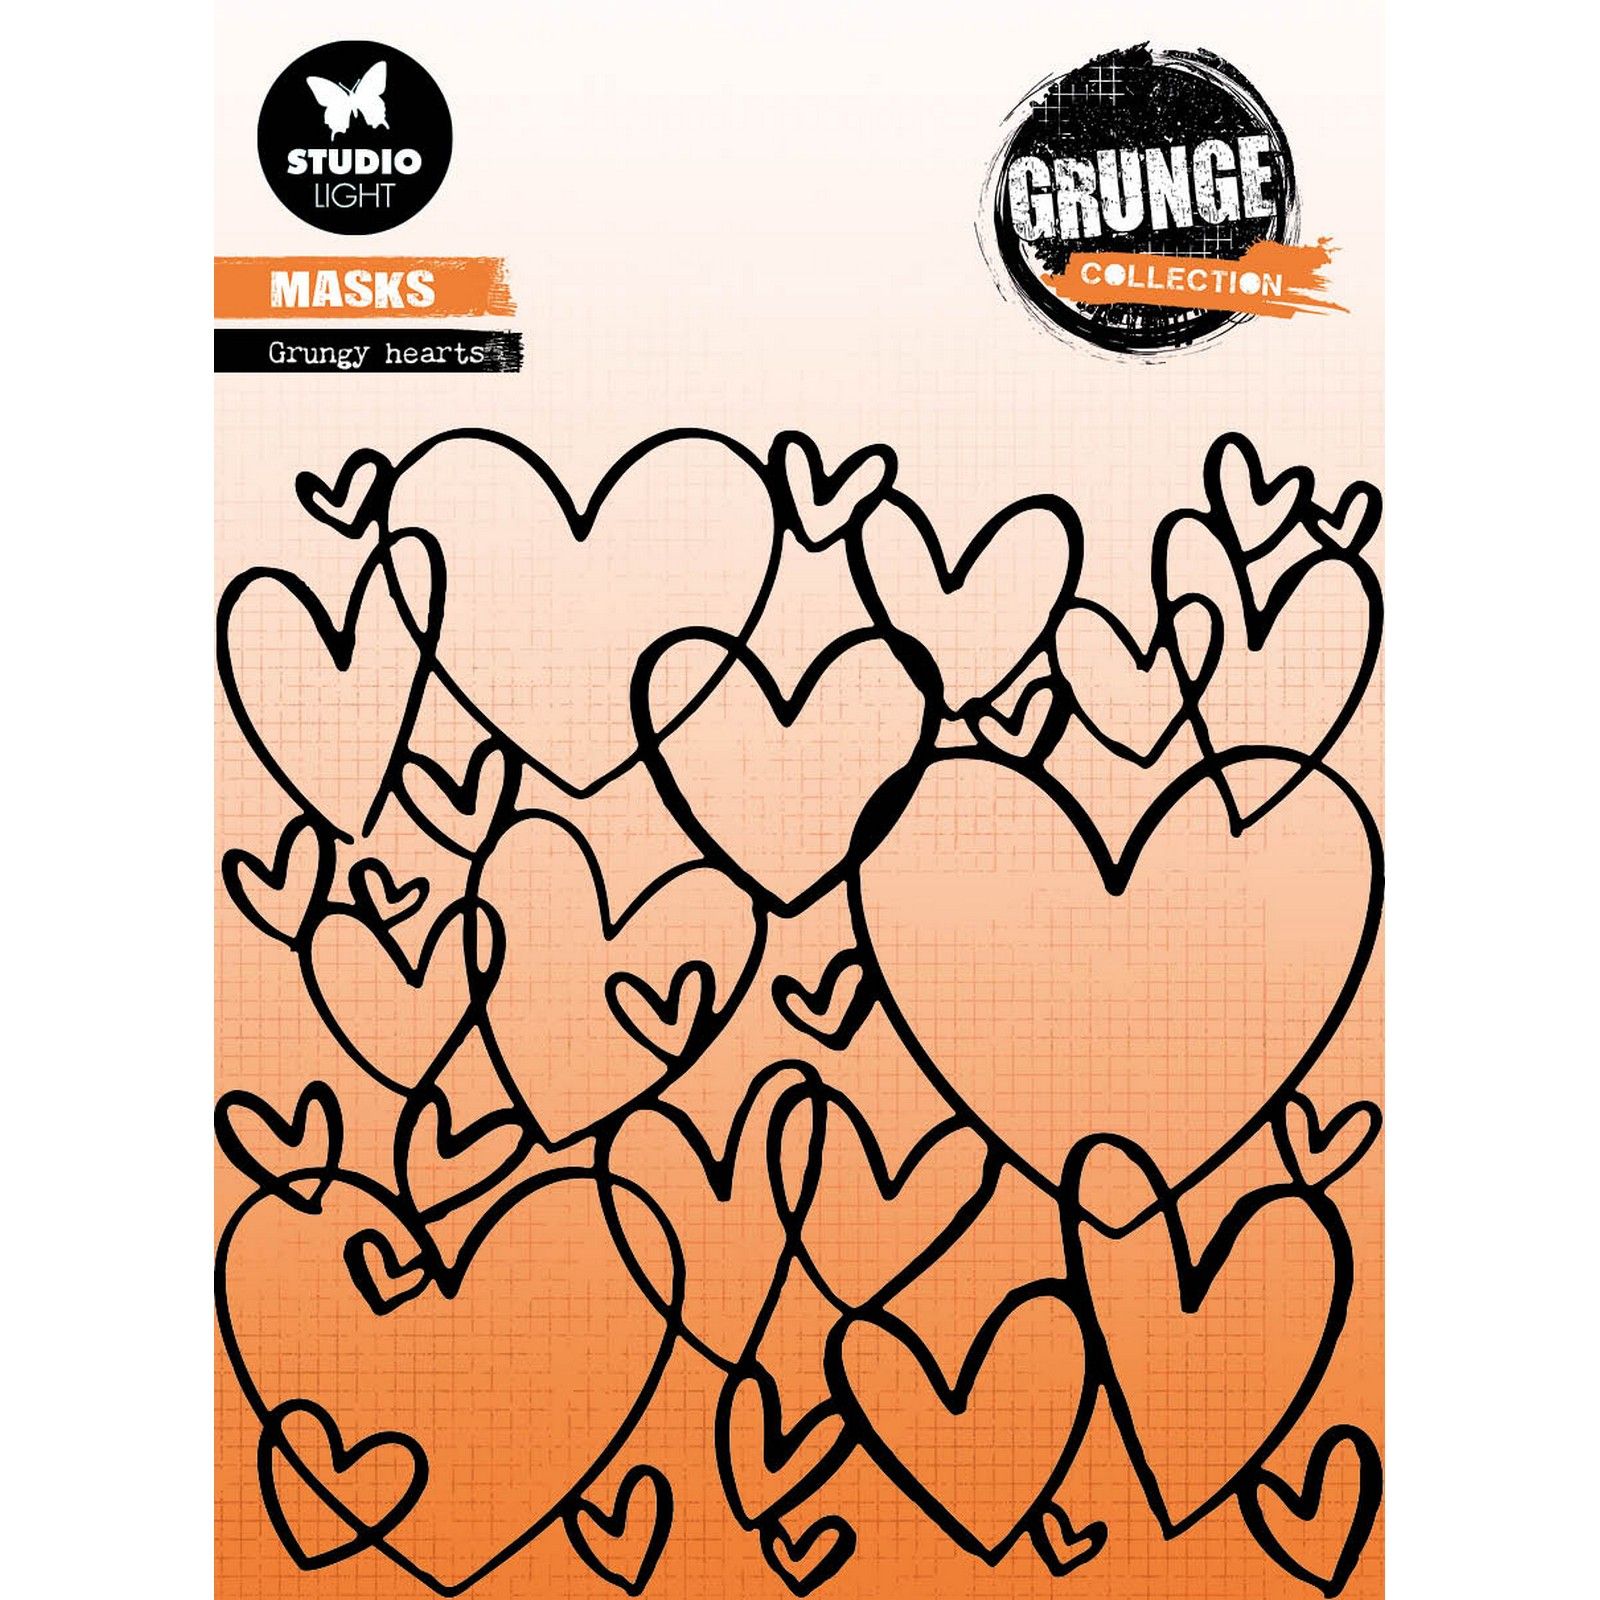 Studio Light • Grunge Collection Mask Stencil Grungy Hearts